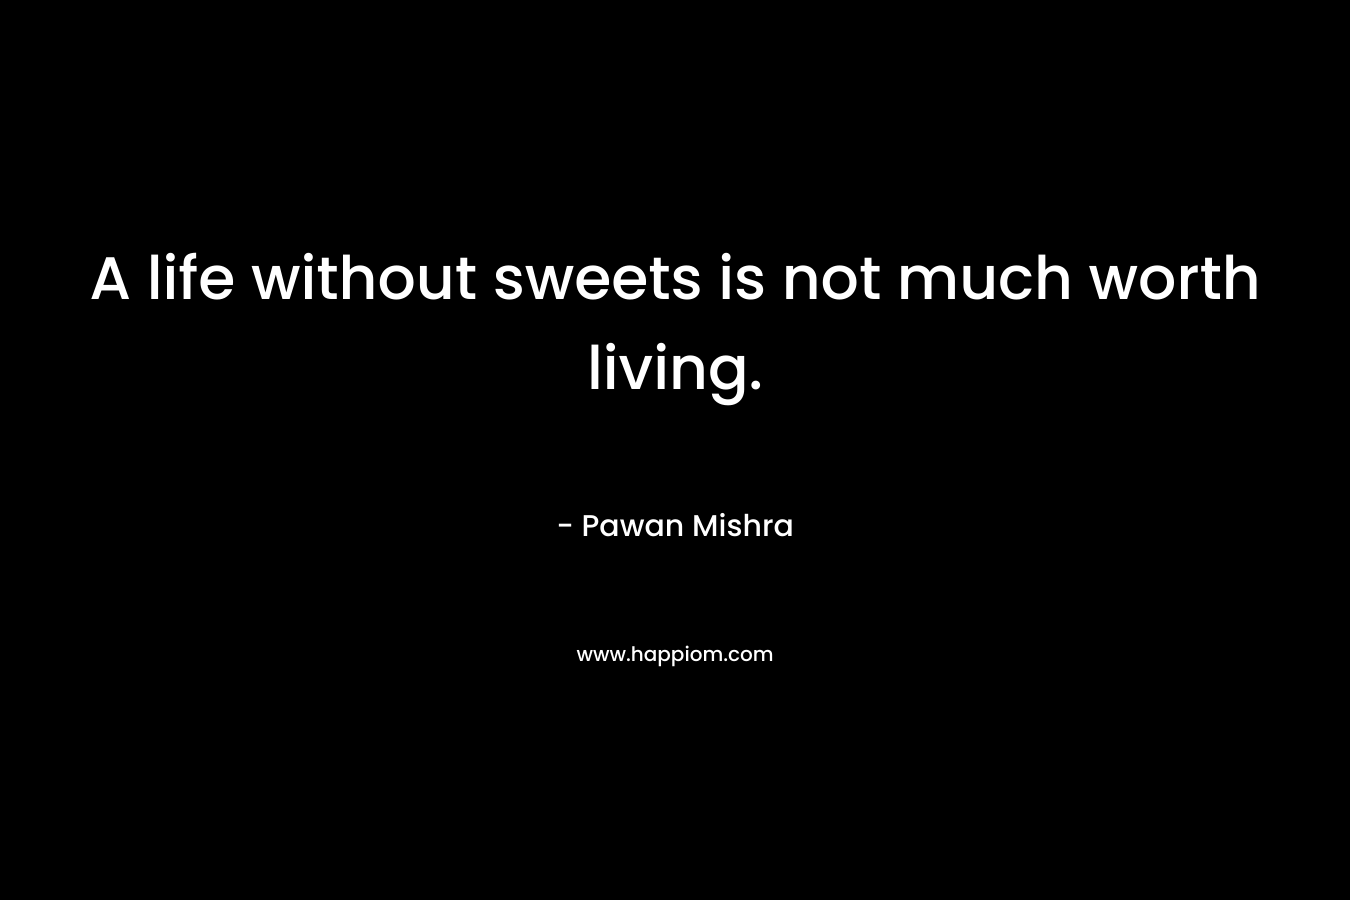 A life without sweets is not much worth living. – Pawan Mishra